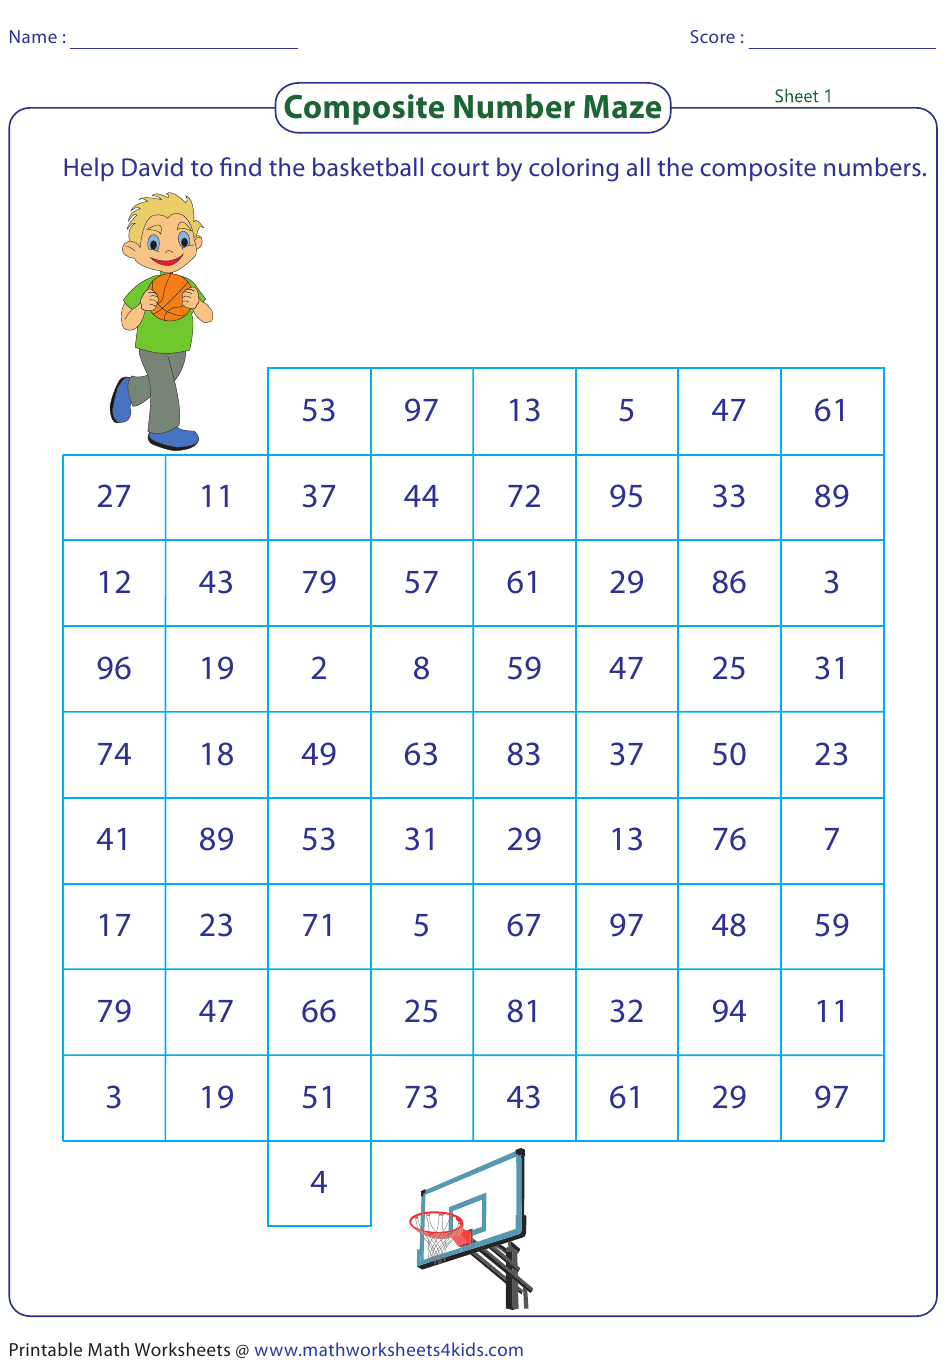 Composite Number Maze Worksheet With Answer Key Download Printable PDF 